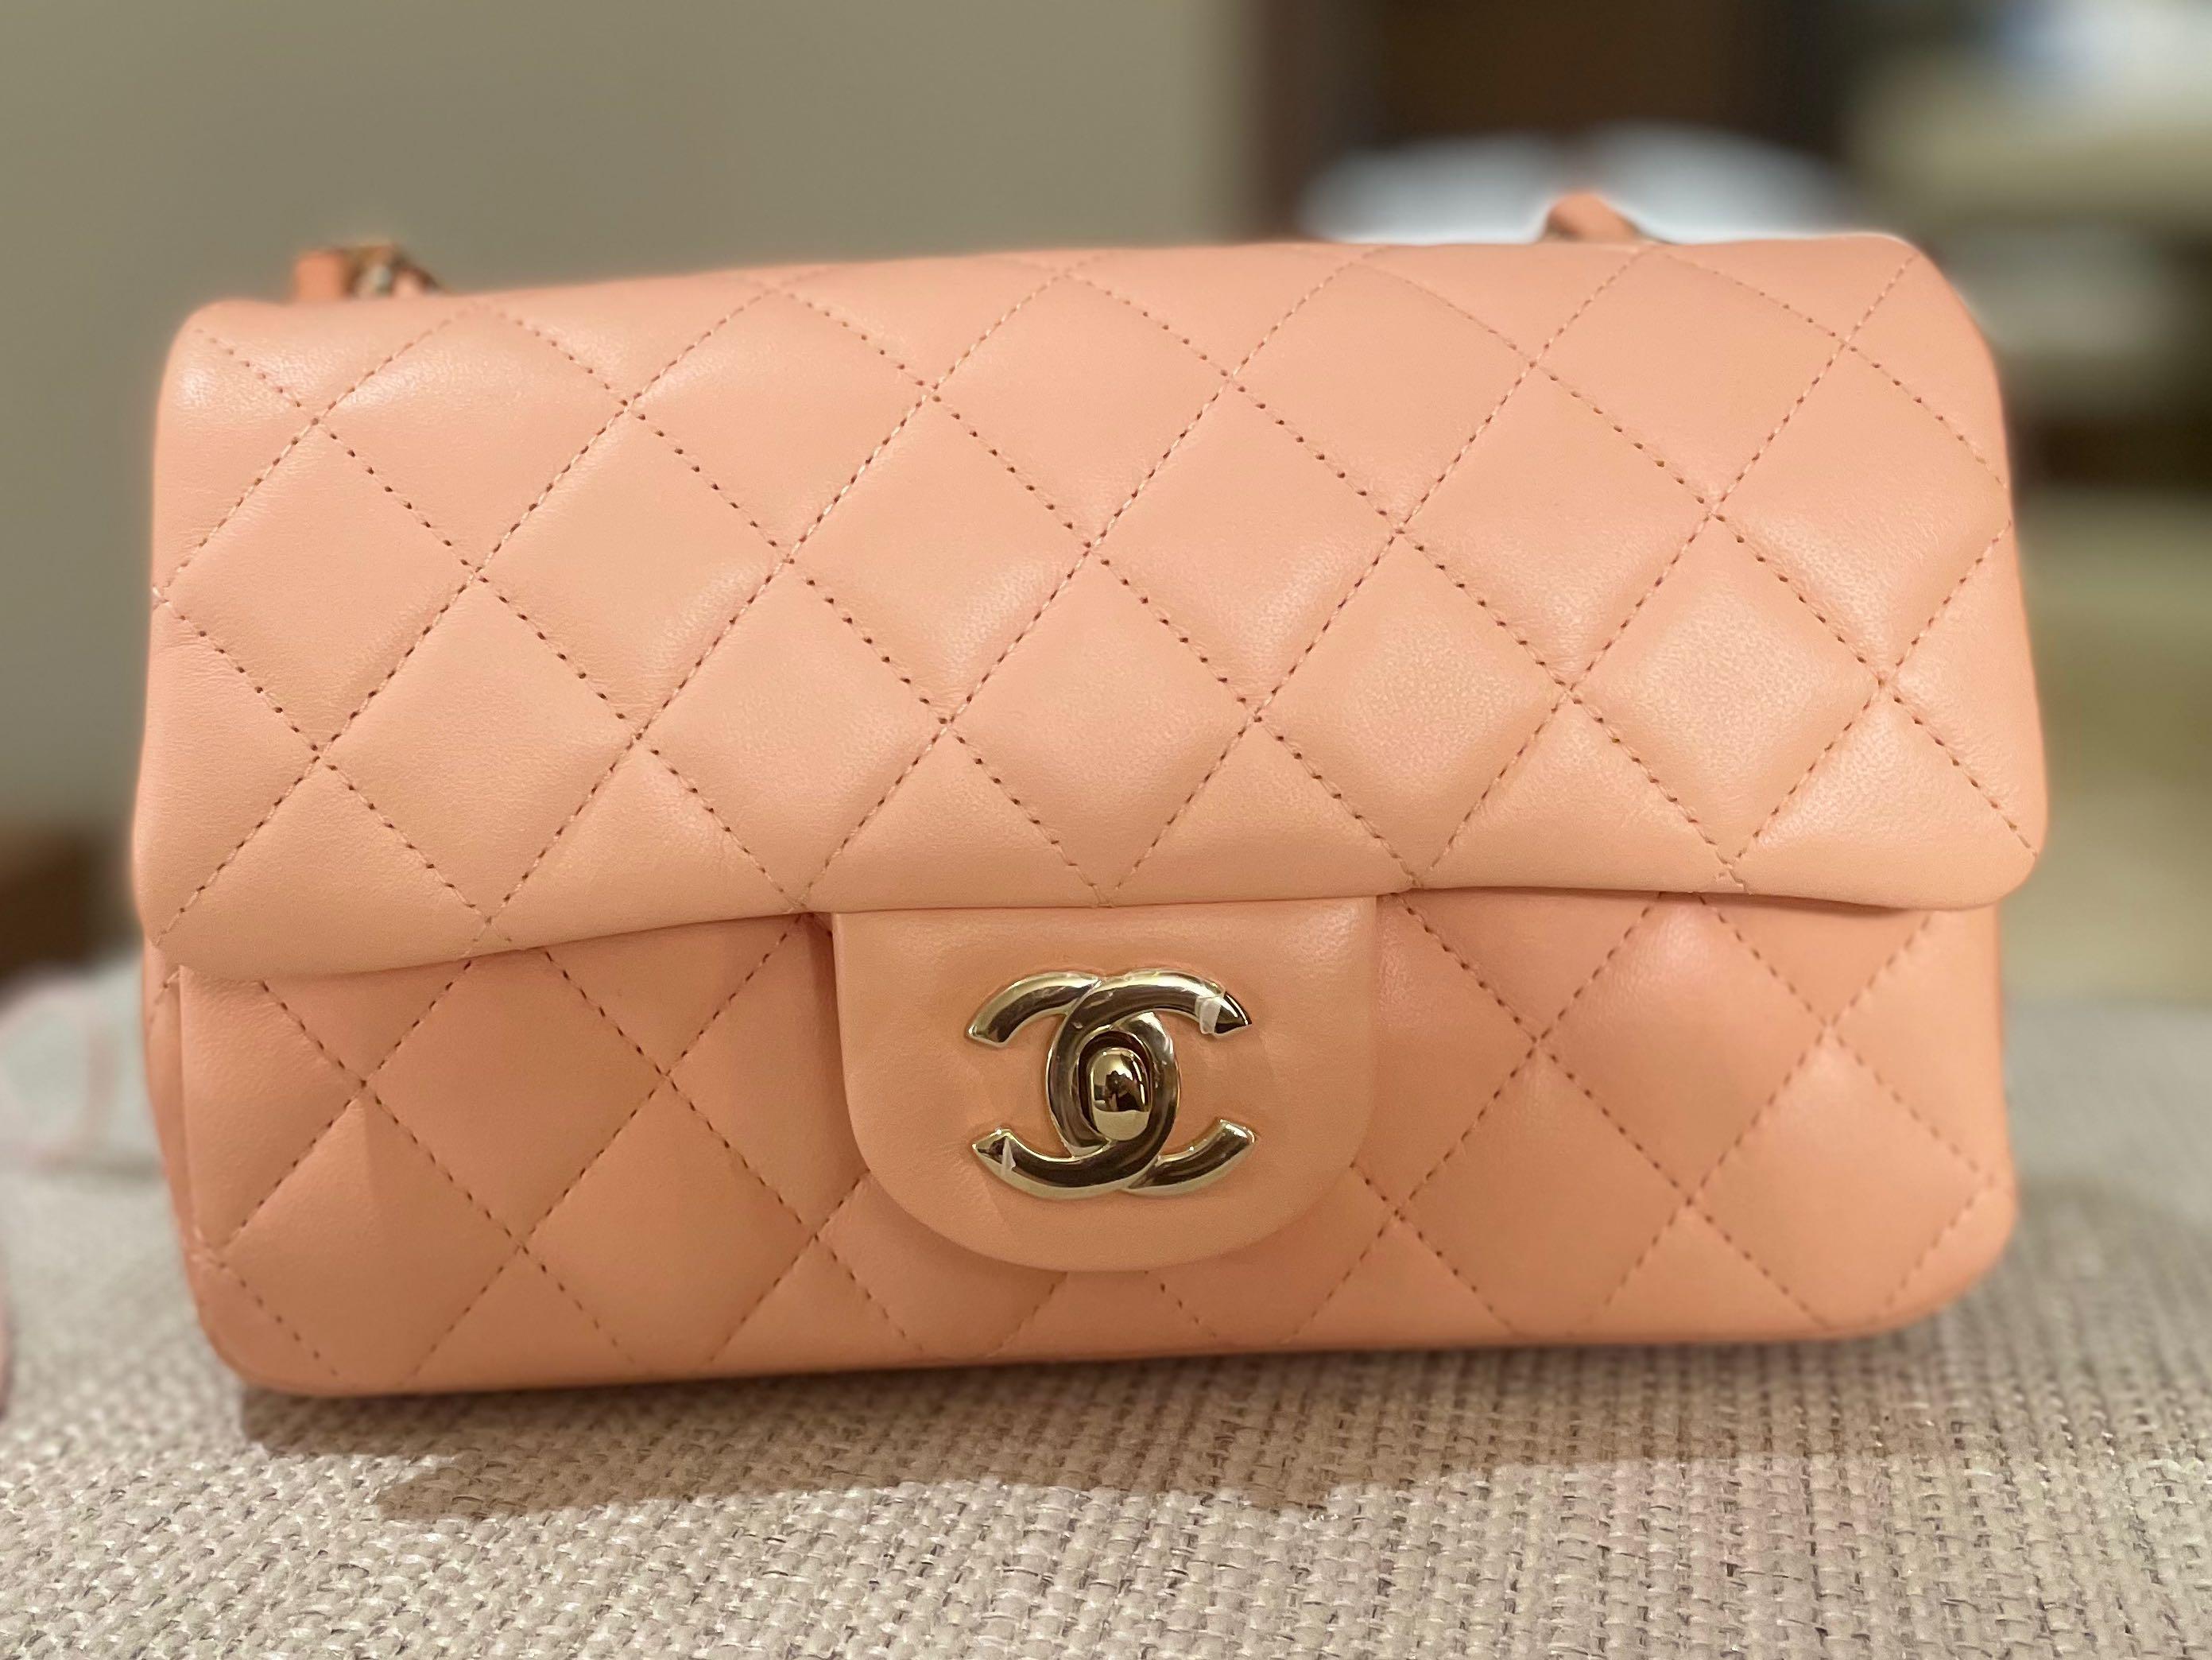 Light beige Chanel bag with a brush